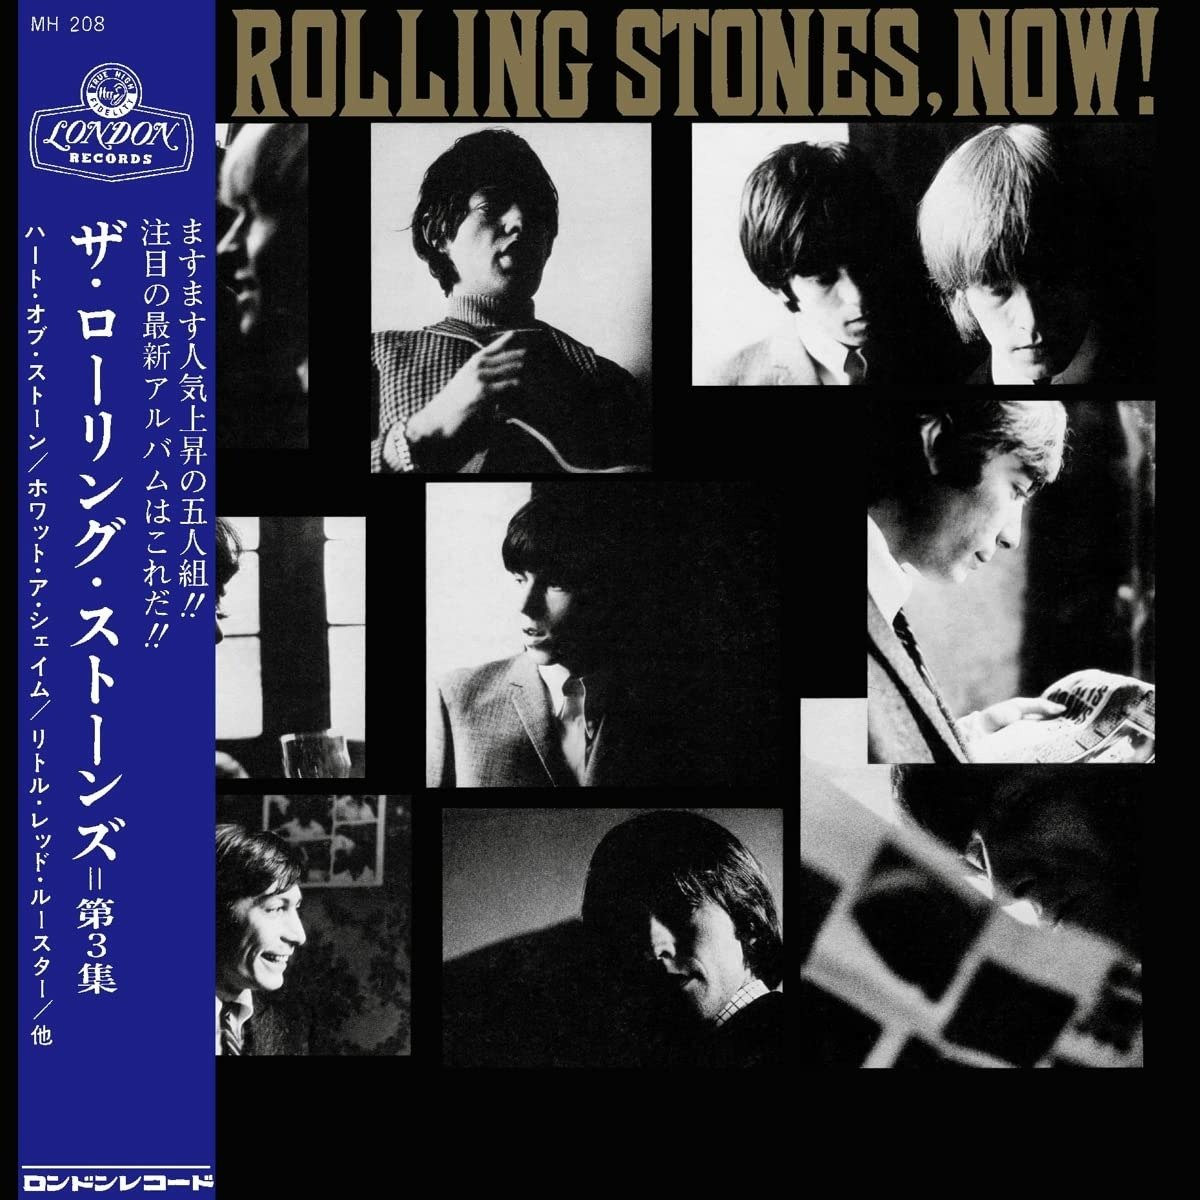 CD Shop - ROLLING STONES The Rolling Stones, Now!